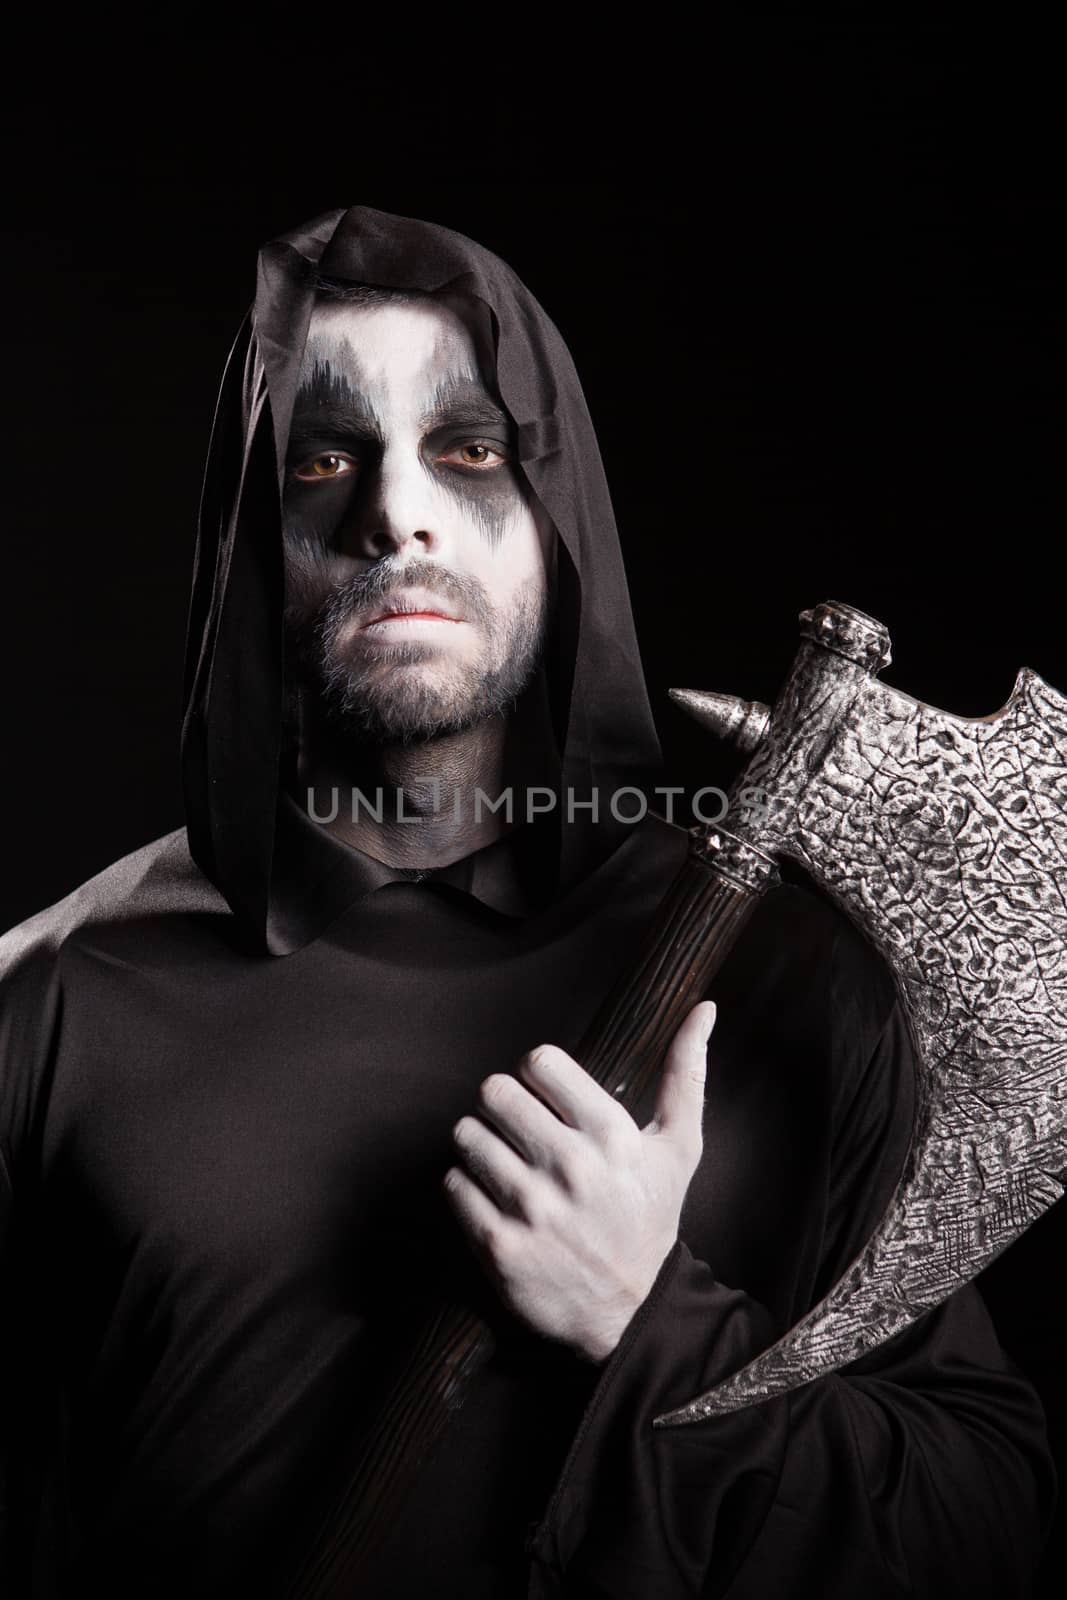 Dangerous grim reaper with a rope holding an axe by DCStudio